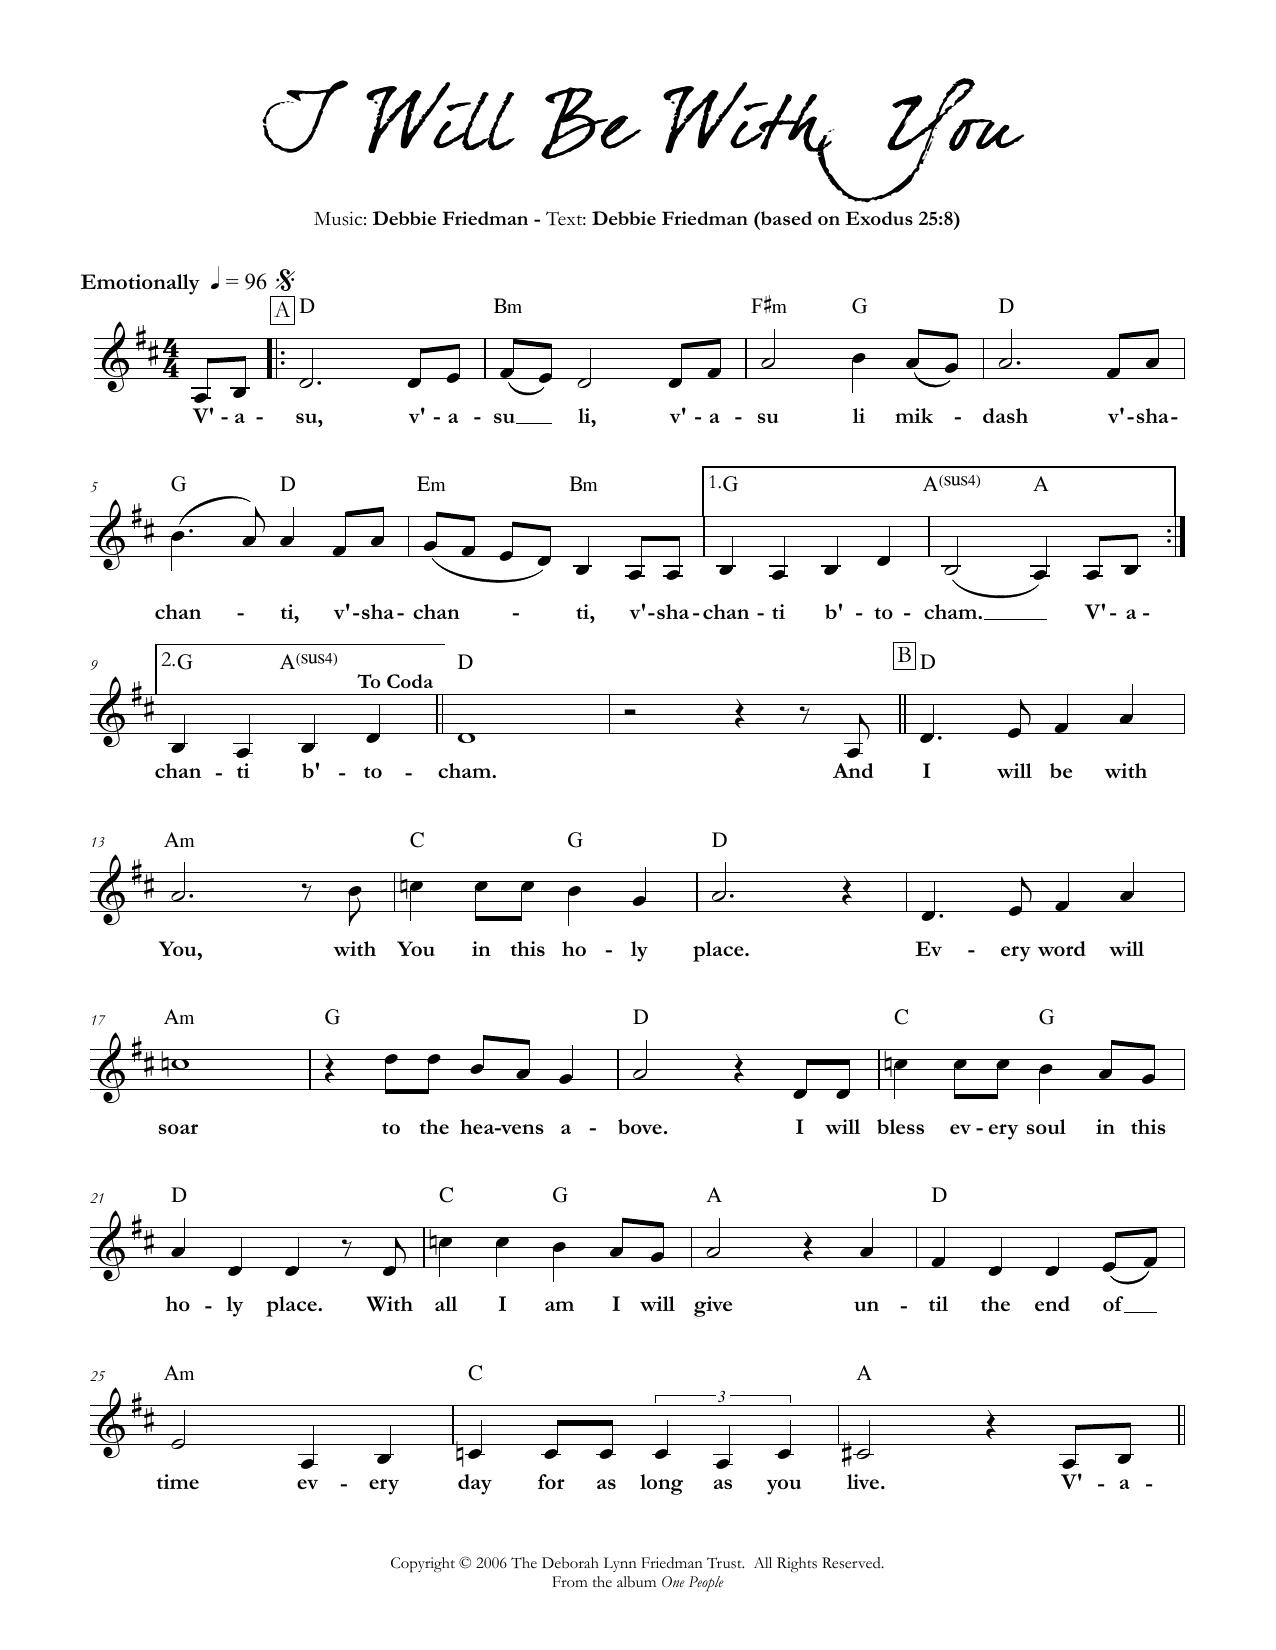 I Will Be With You sheet music